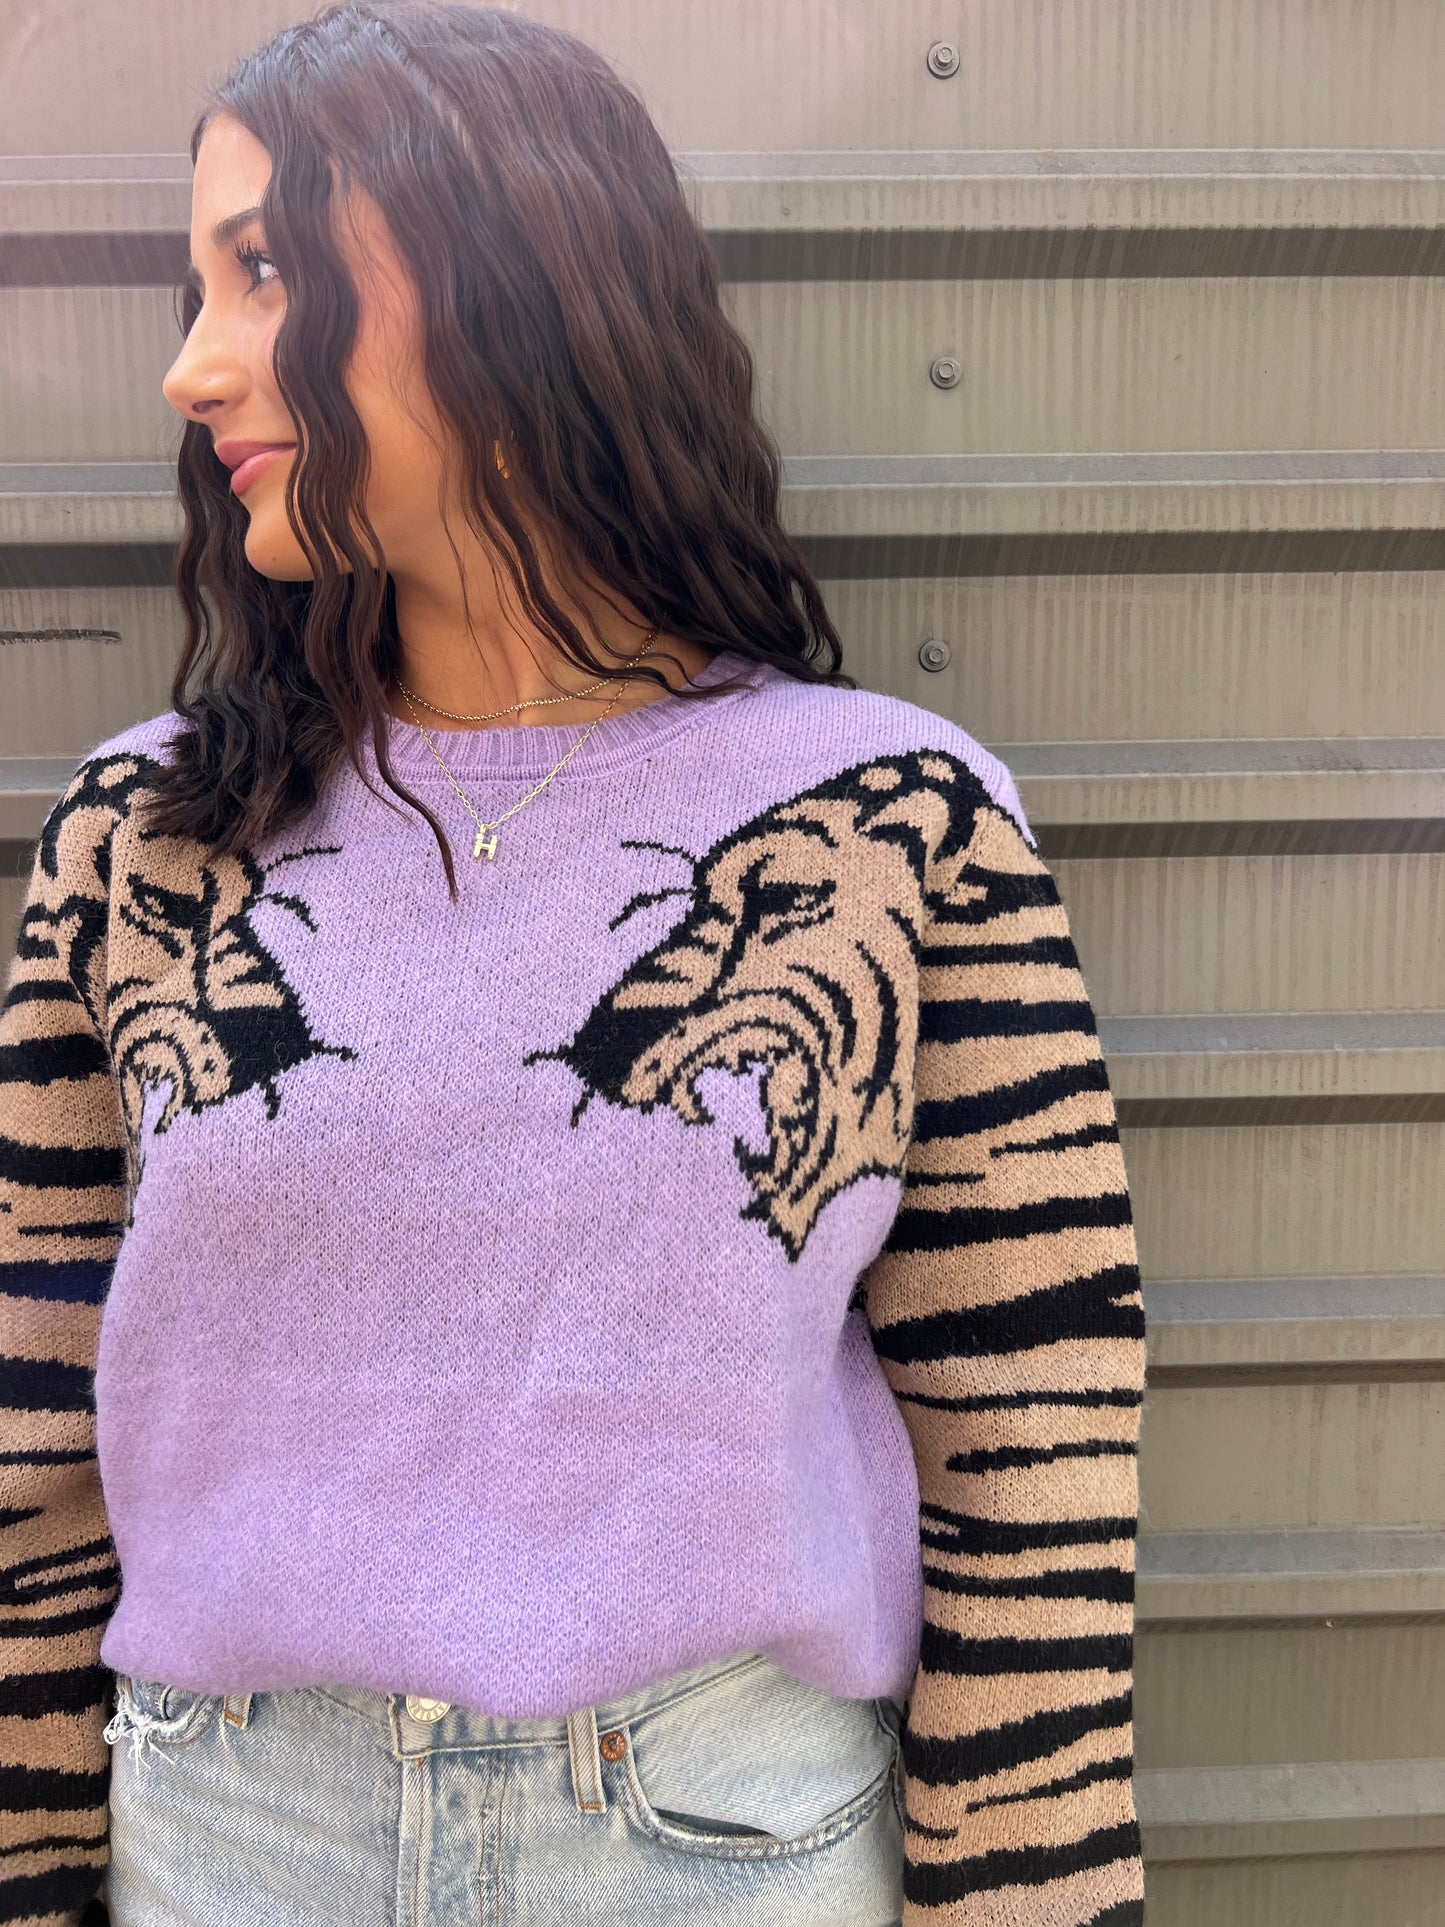 TIGER SLEEVE PURPLE SWEATER - THE HIP EAGLE BOUTIQUE